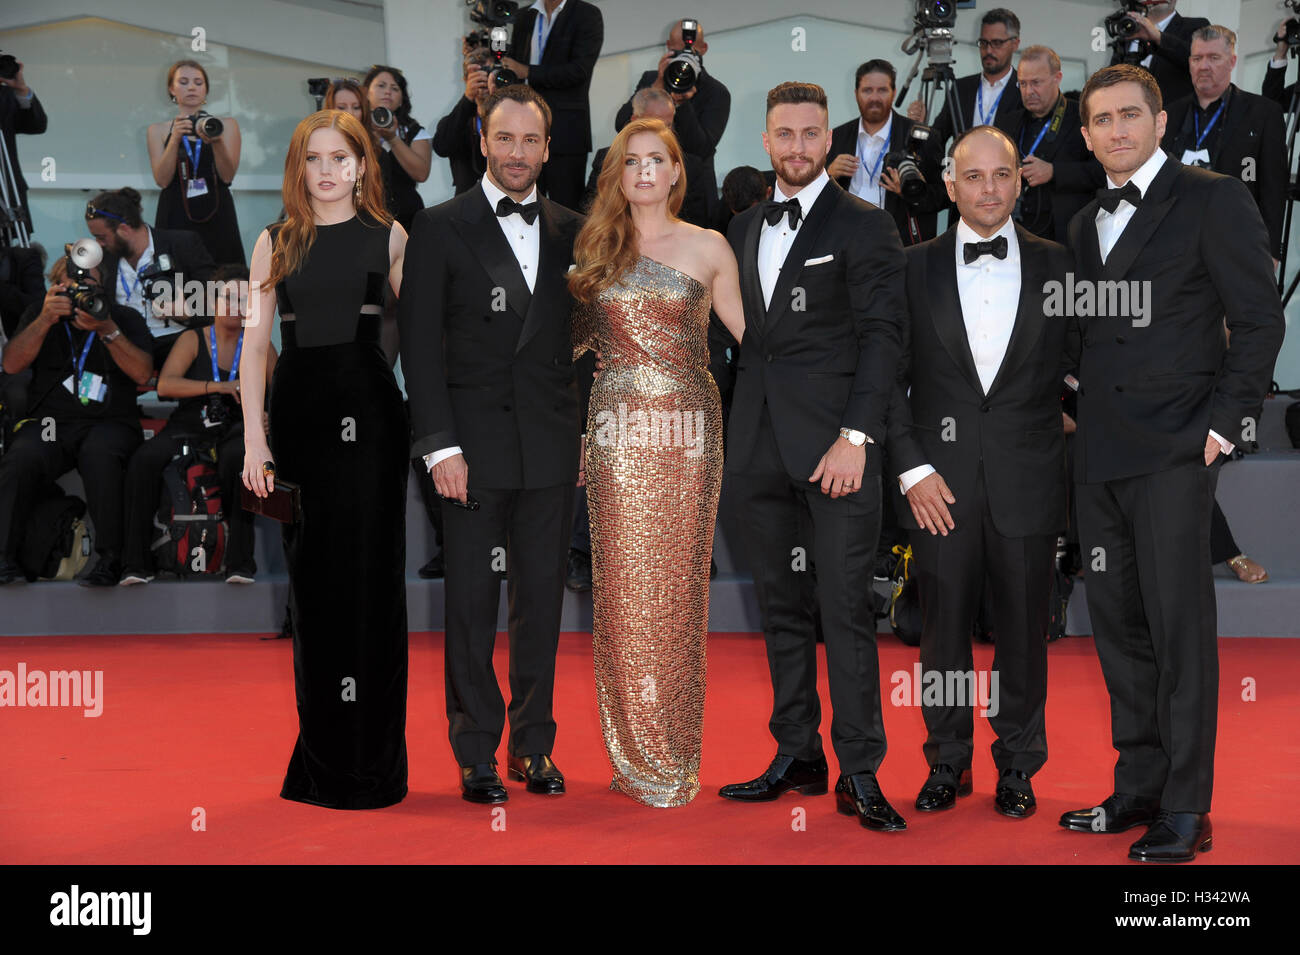 73rd Venice Film Festival Nocturnal Animals Premiere Featuring Tom Ford Amy Adams Jake Gyllenhaal Ellie Bamber Aaron Taylor Johnson Where Venice Italy When 02 Sep 2016 Credit Ipa Wenn Com Only Available For